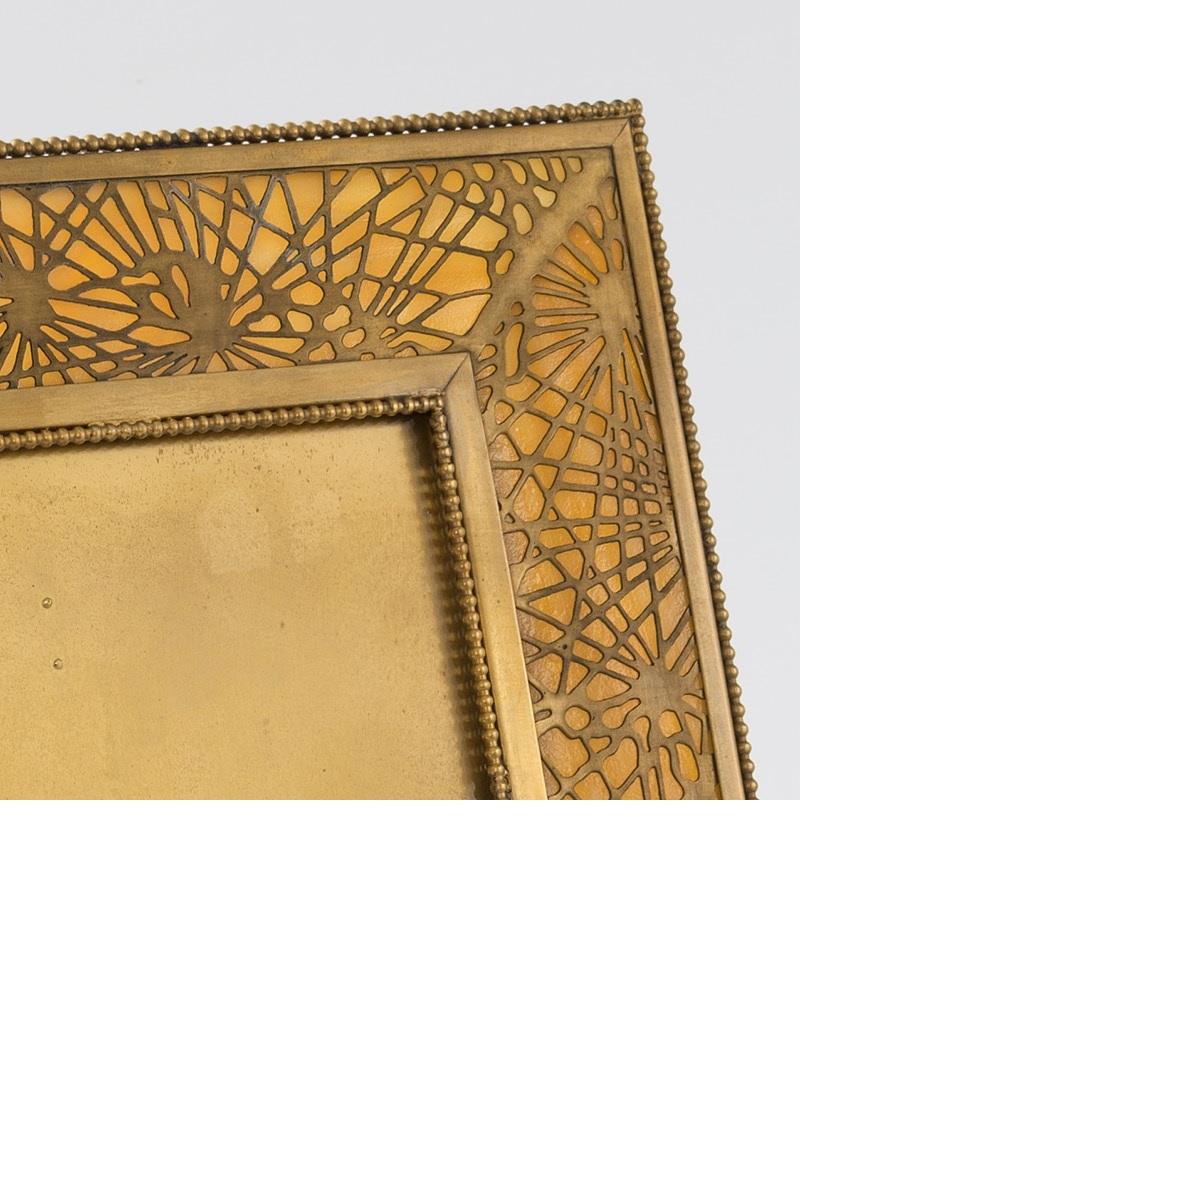 A Tiffany Studios New York gilt bronze and Favrile glass picture frame in the “Pine Needle” pattern with an square center and beaded trim, mottled amber and opaque colored glass, circa 1900.

A similar picture frame is pictured in: Tiffany Desk